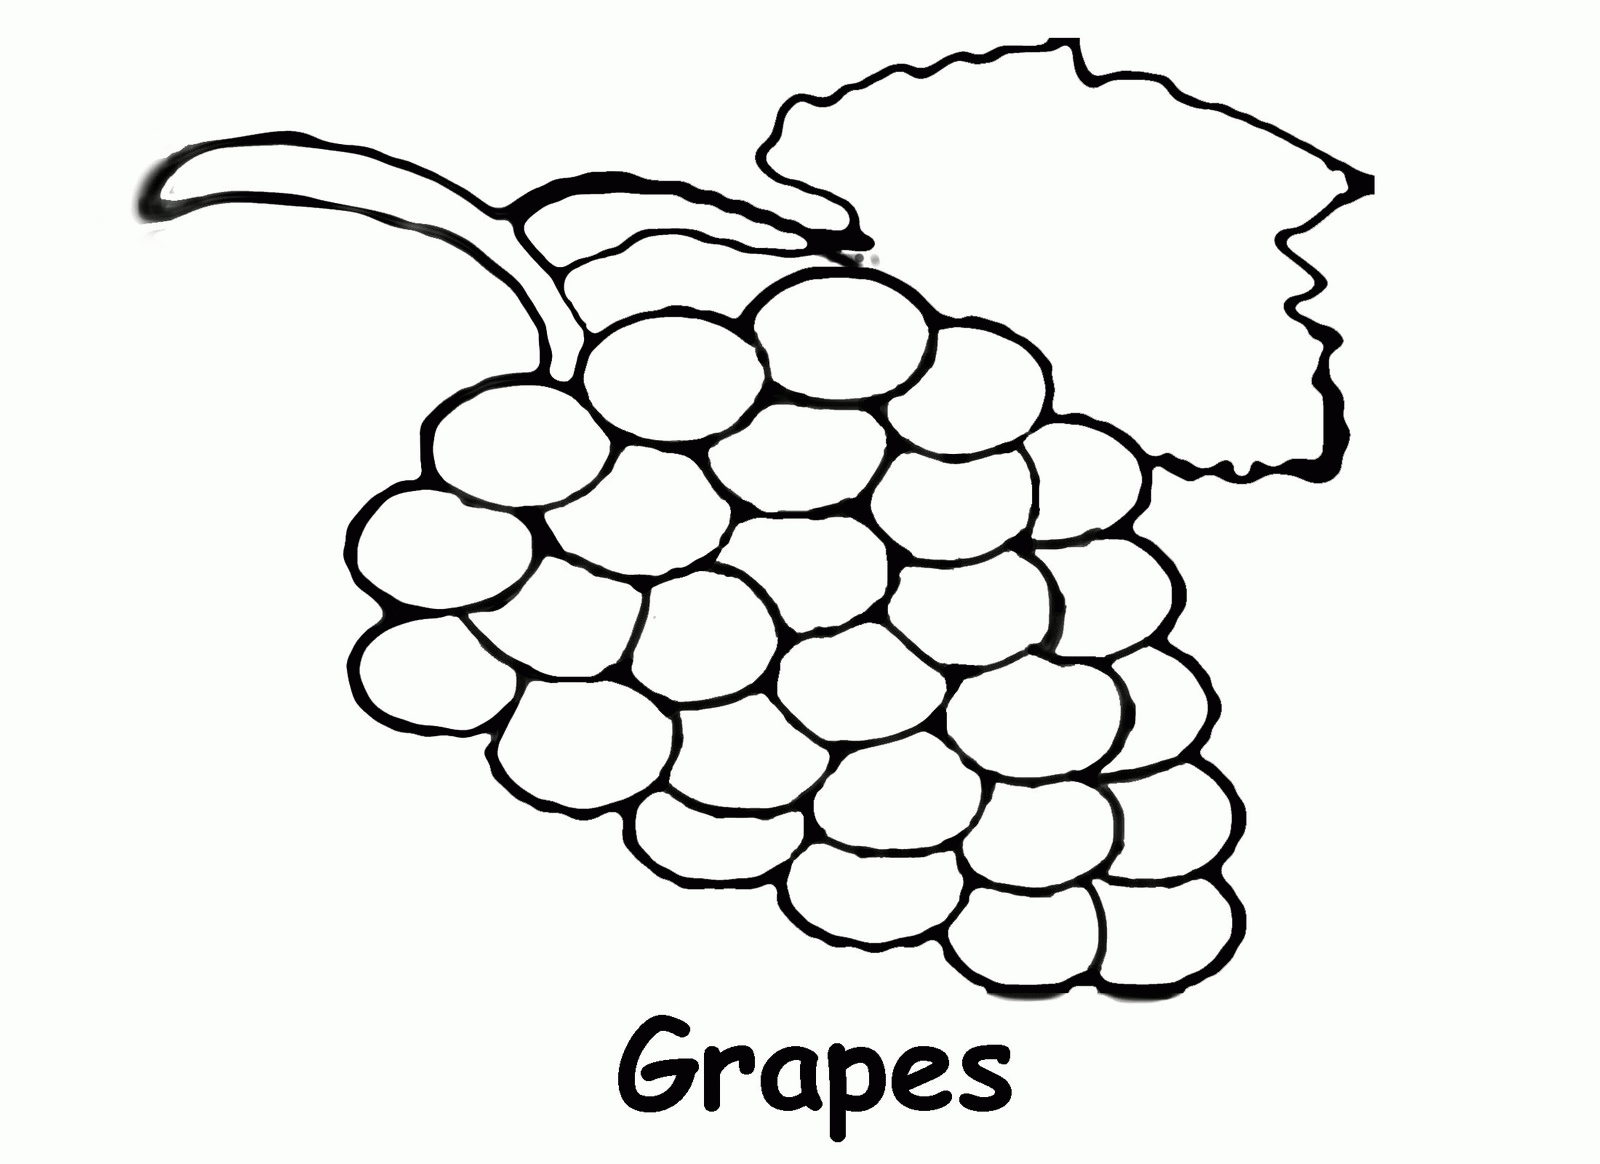 grapes to color grapes coloring page coloring home to grapes color 